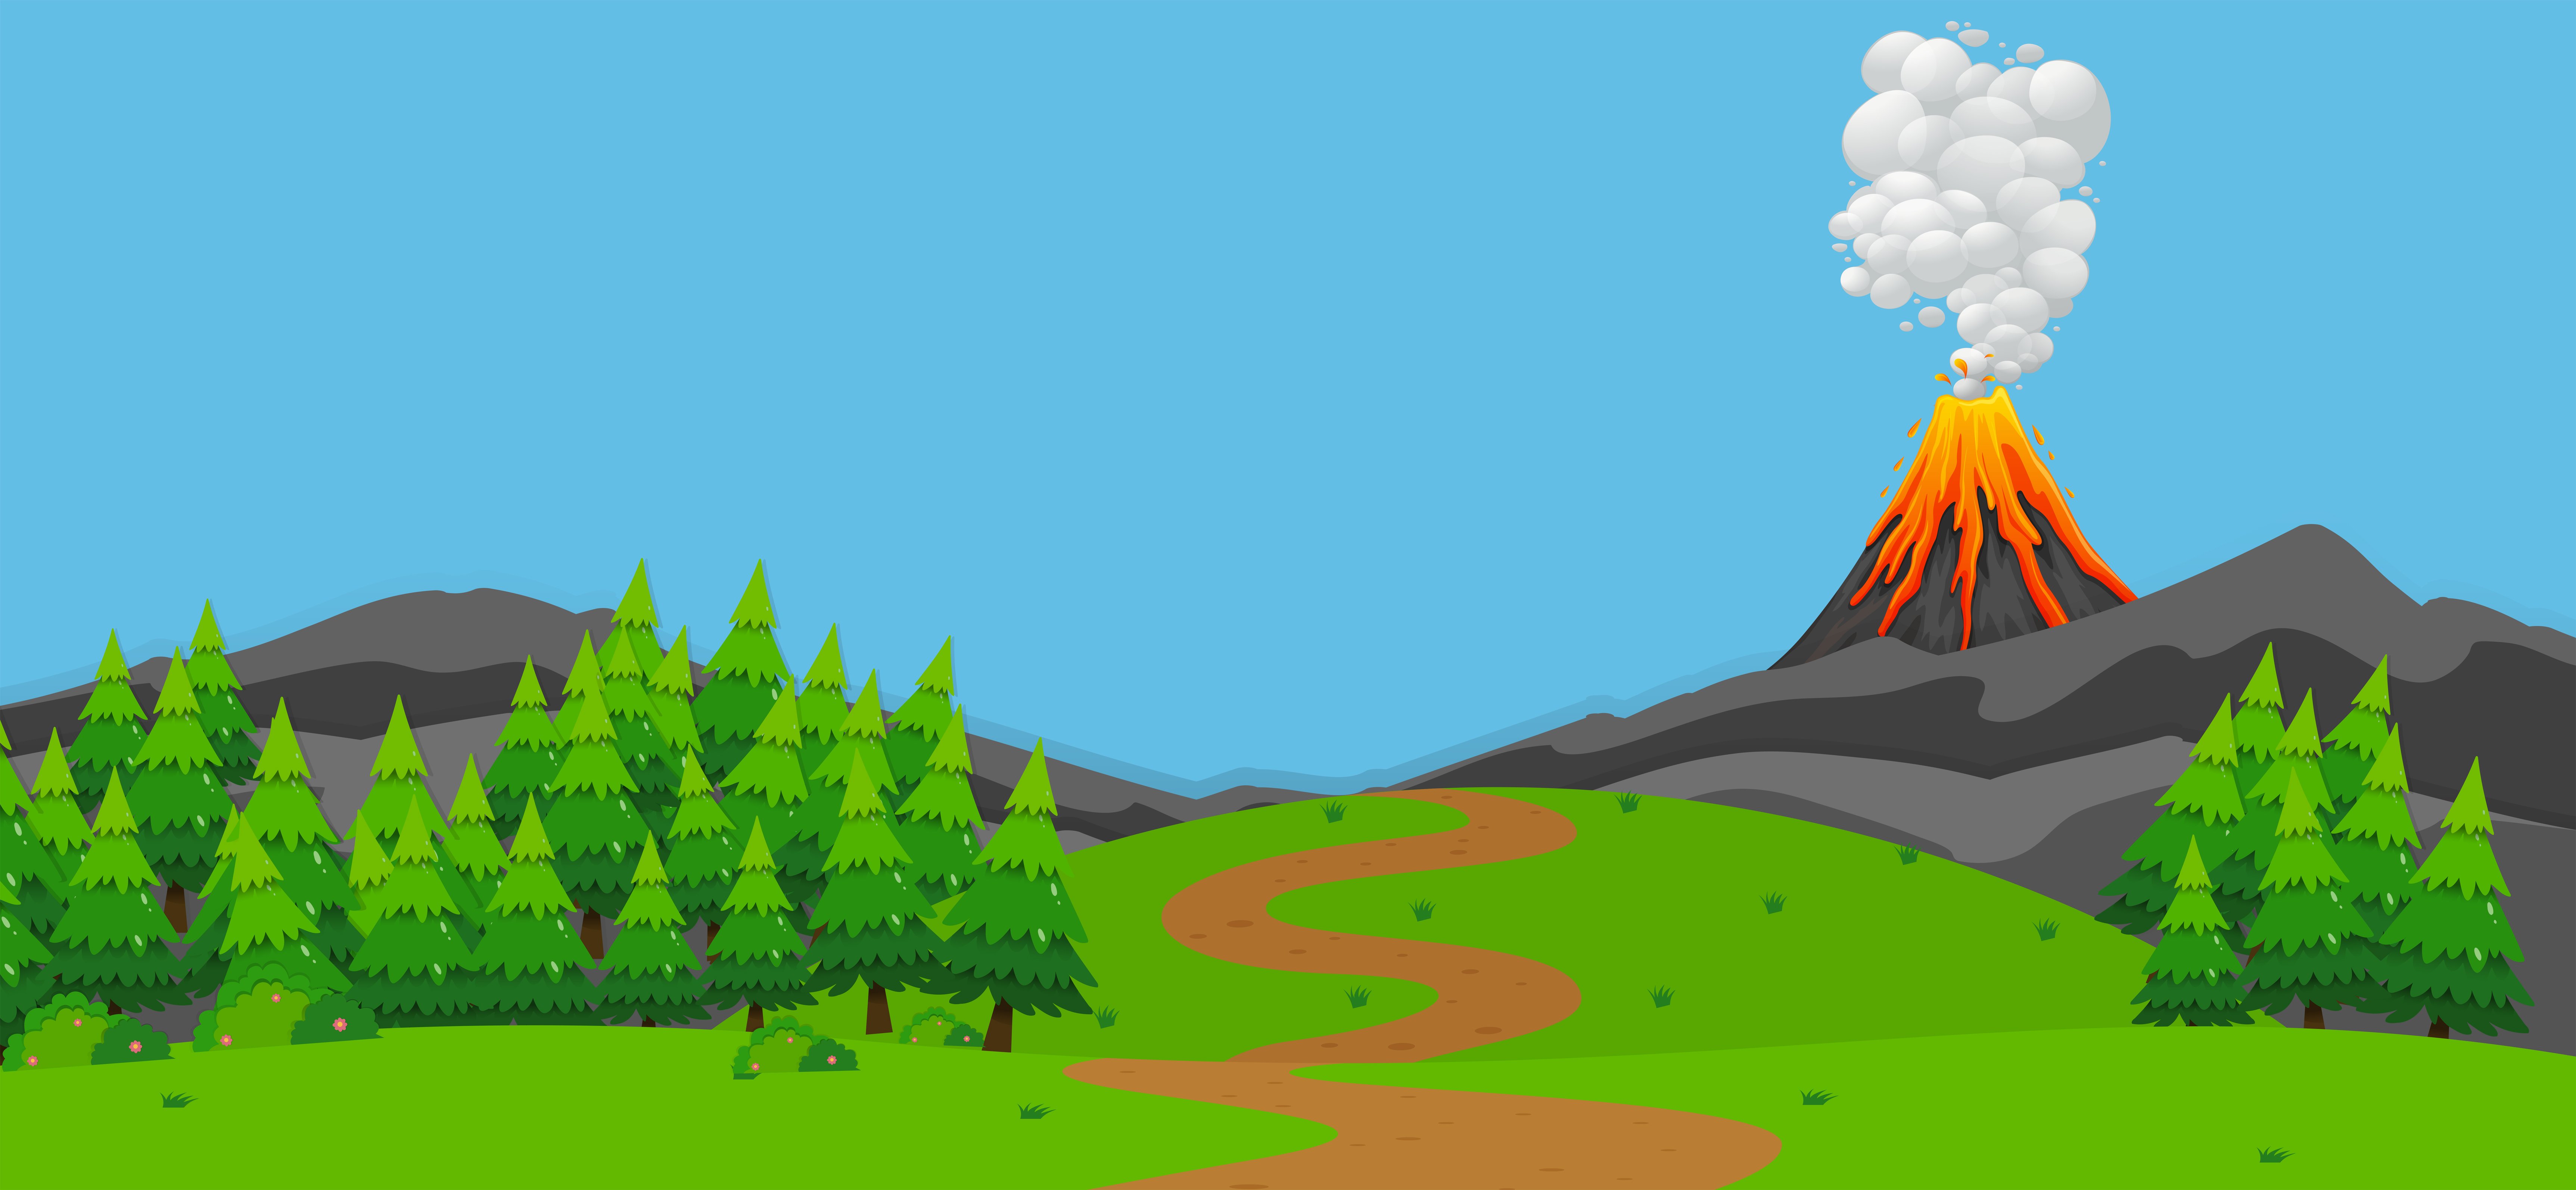 Background Scene With Volcano And Forest Vector Art At Vecteezy